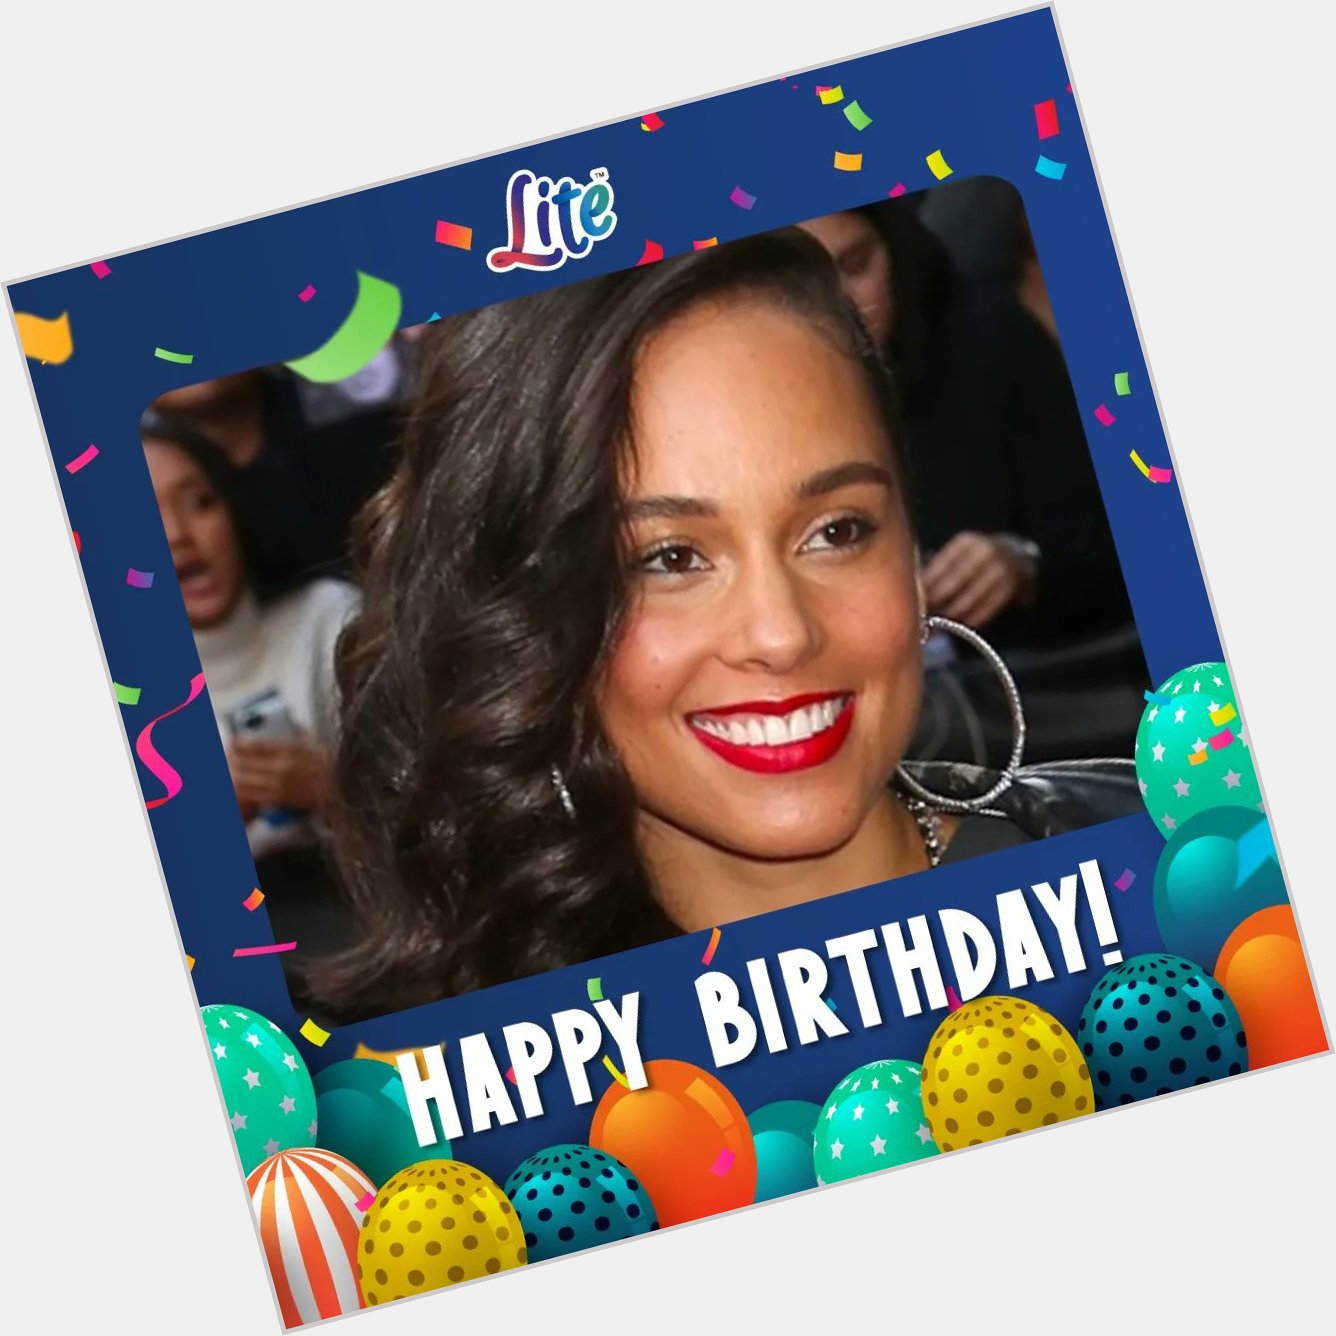 LITE would like to wish the \"Girl On Fire\" -Alicia Keys, a happy birthday! 